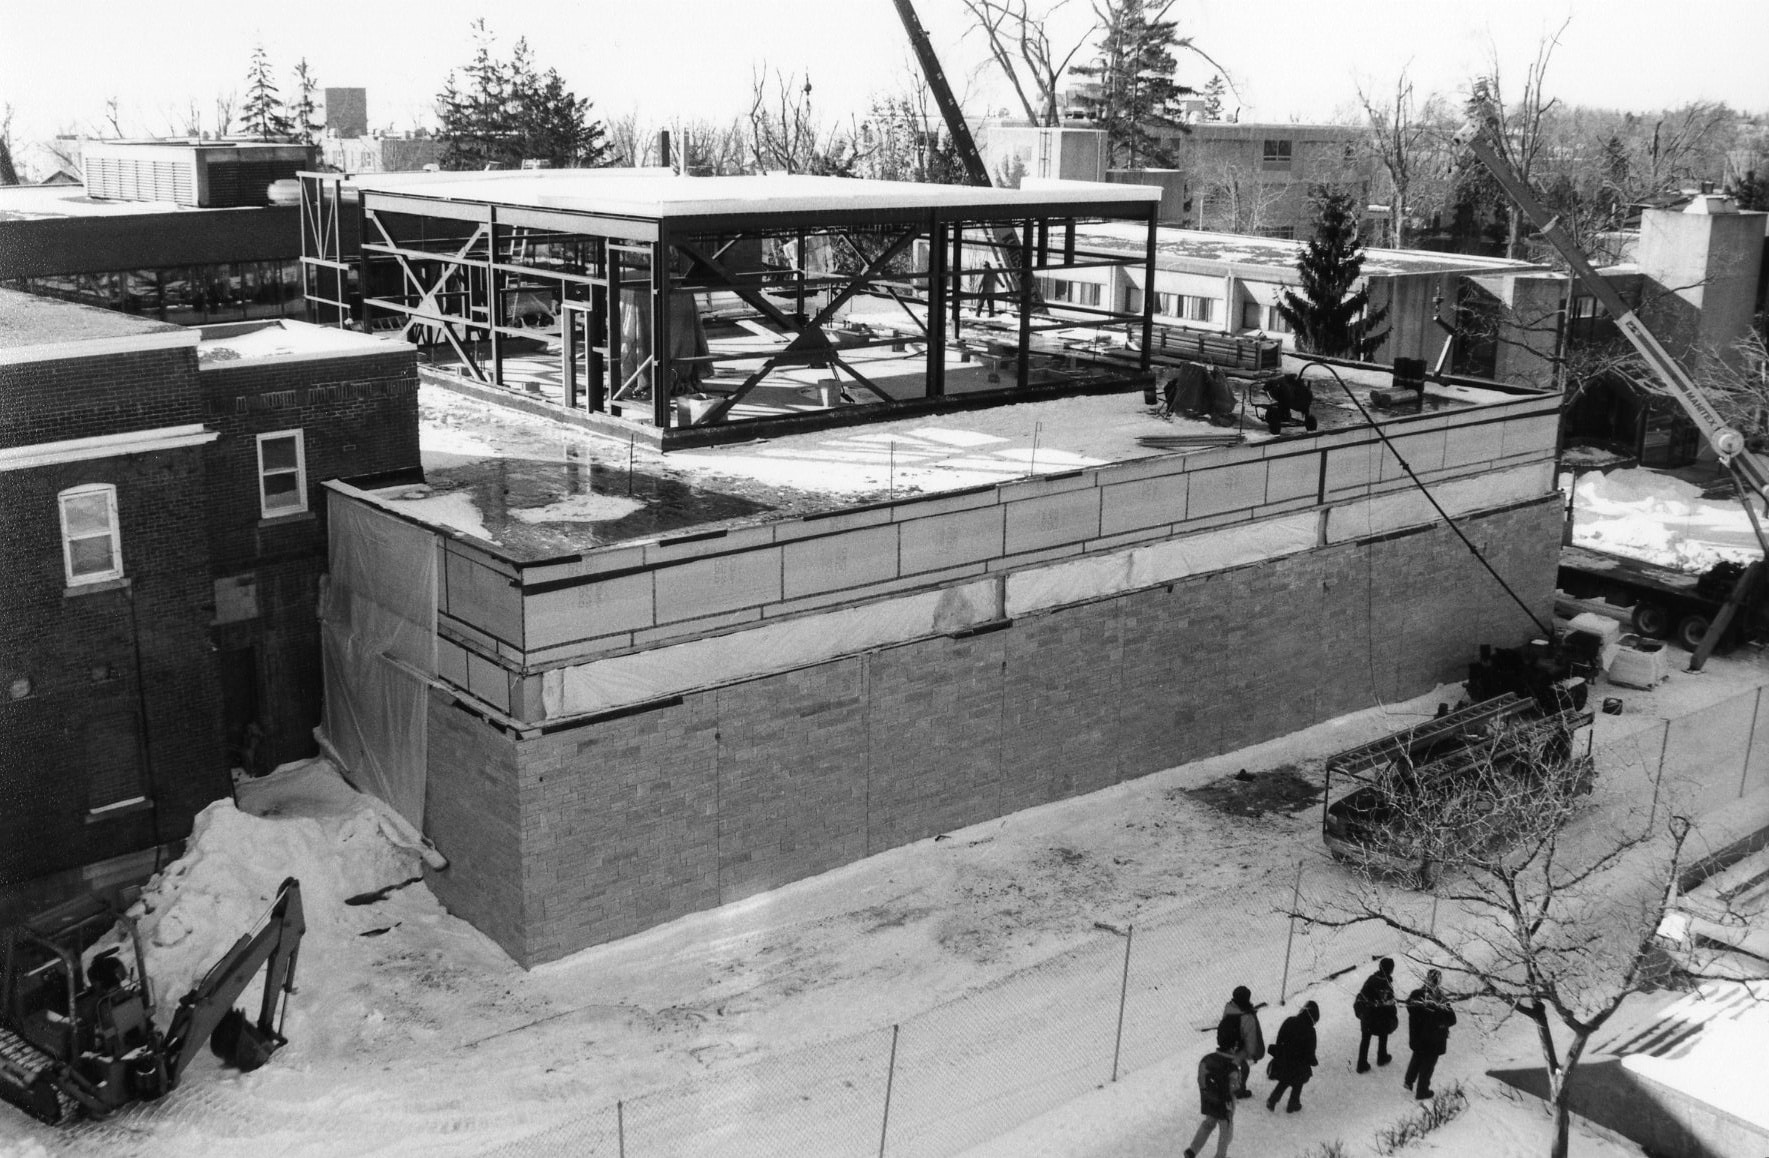 Black-and-white photograph showing a snow-covered university campus with a two-story stone building under construction.